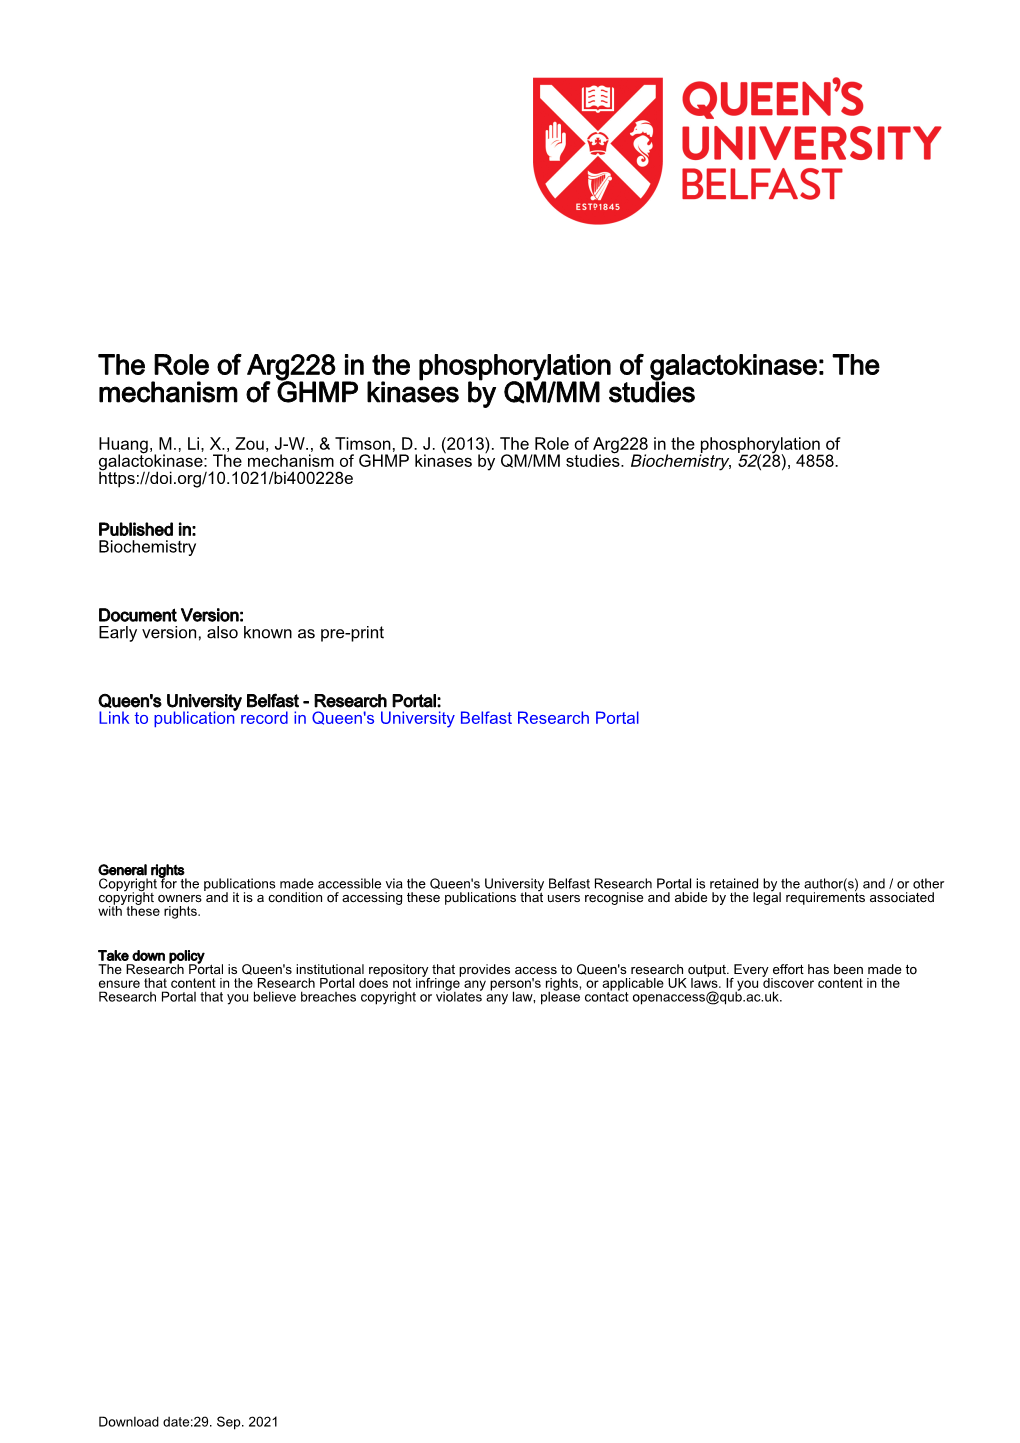 The Role of Arg228 in the Phosphorylation of Galactokinase: the Mechanism of GHMP Kinases by QM/MM Studies